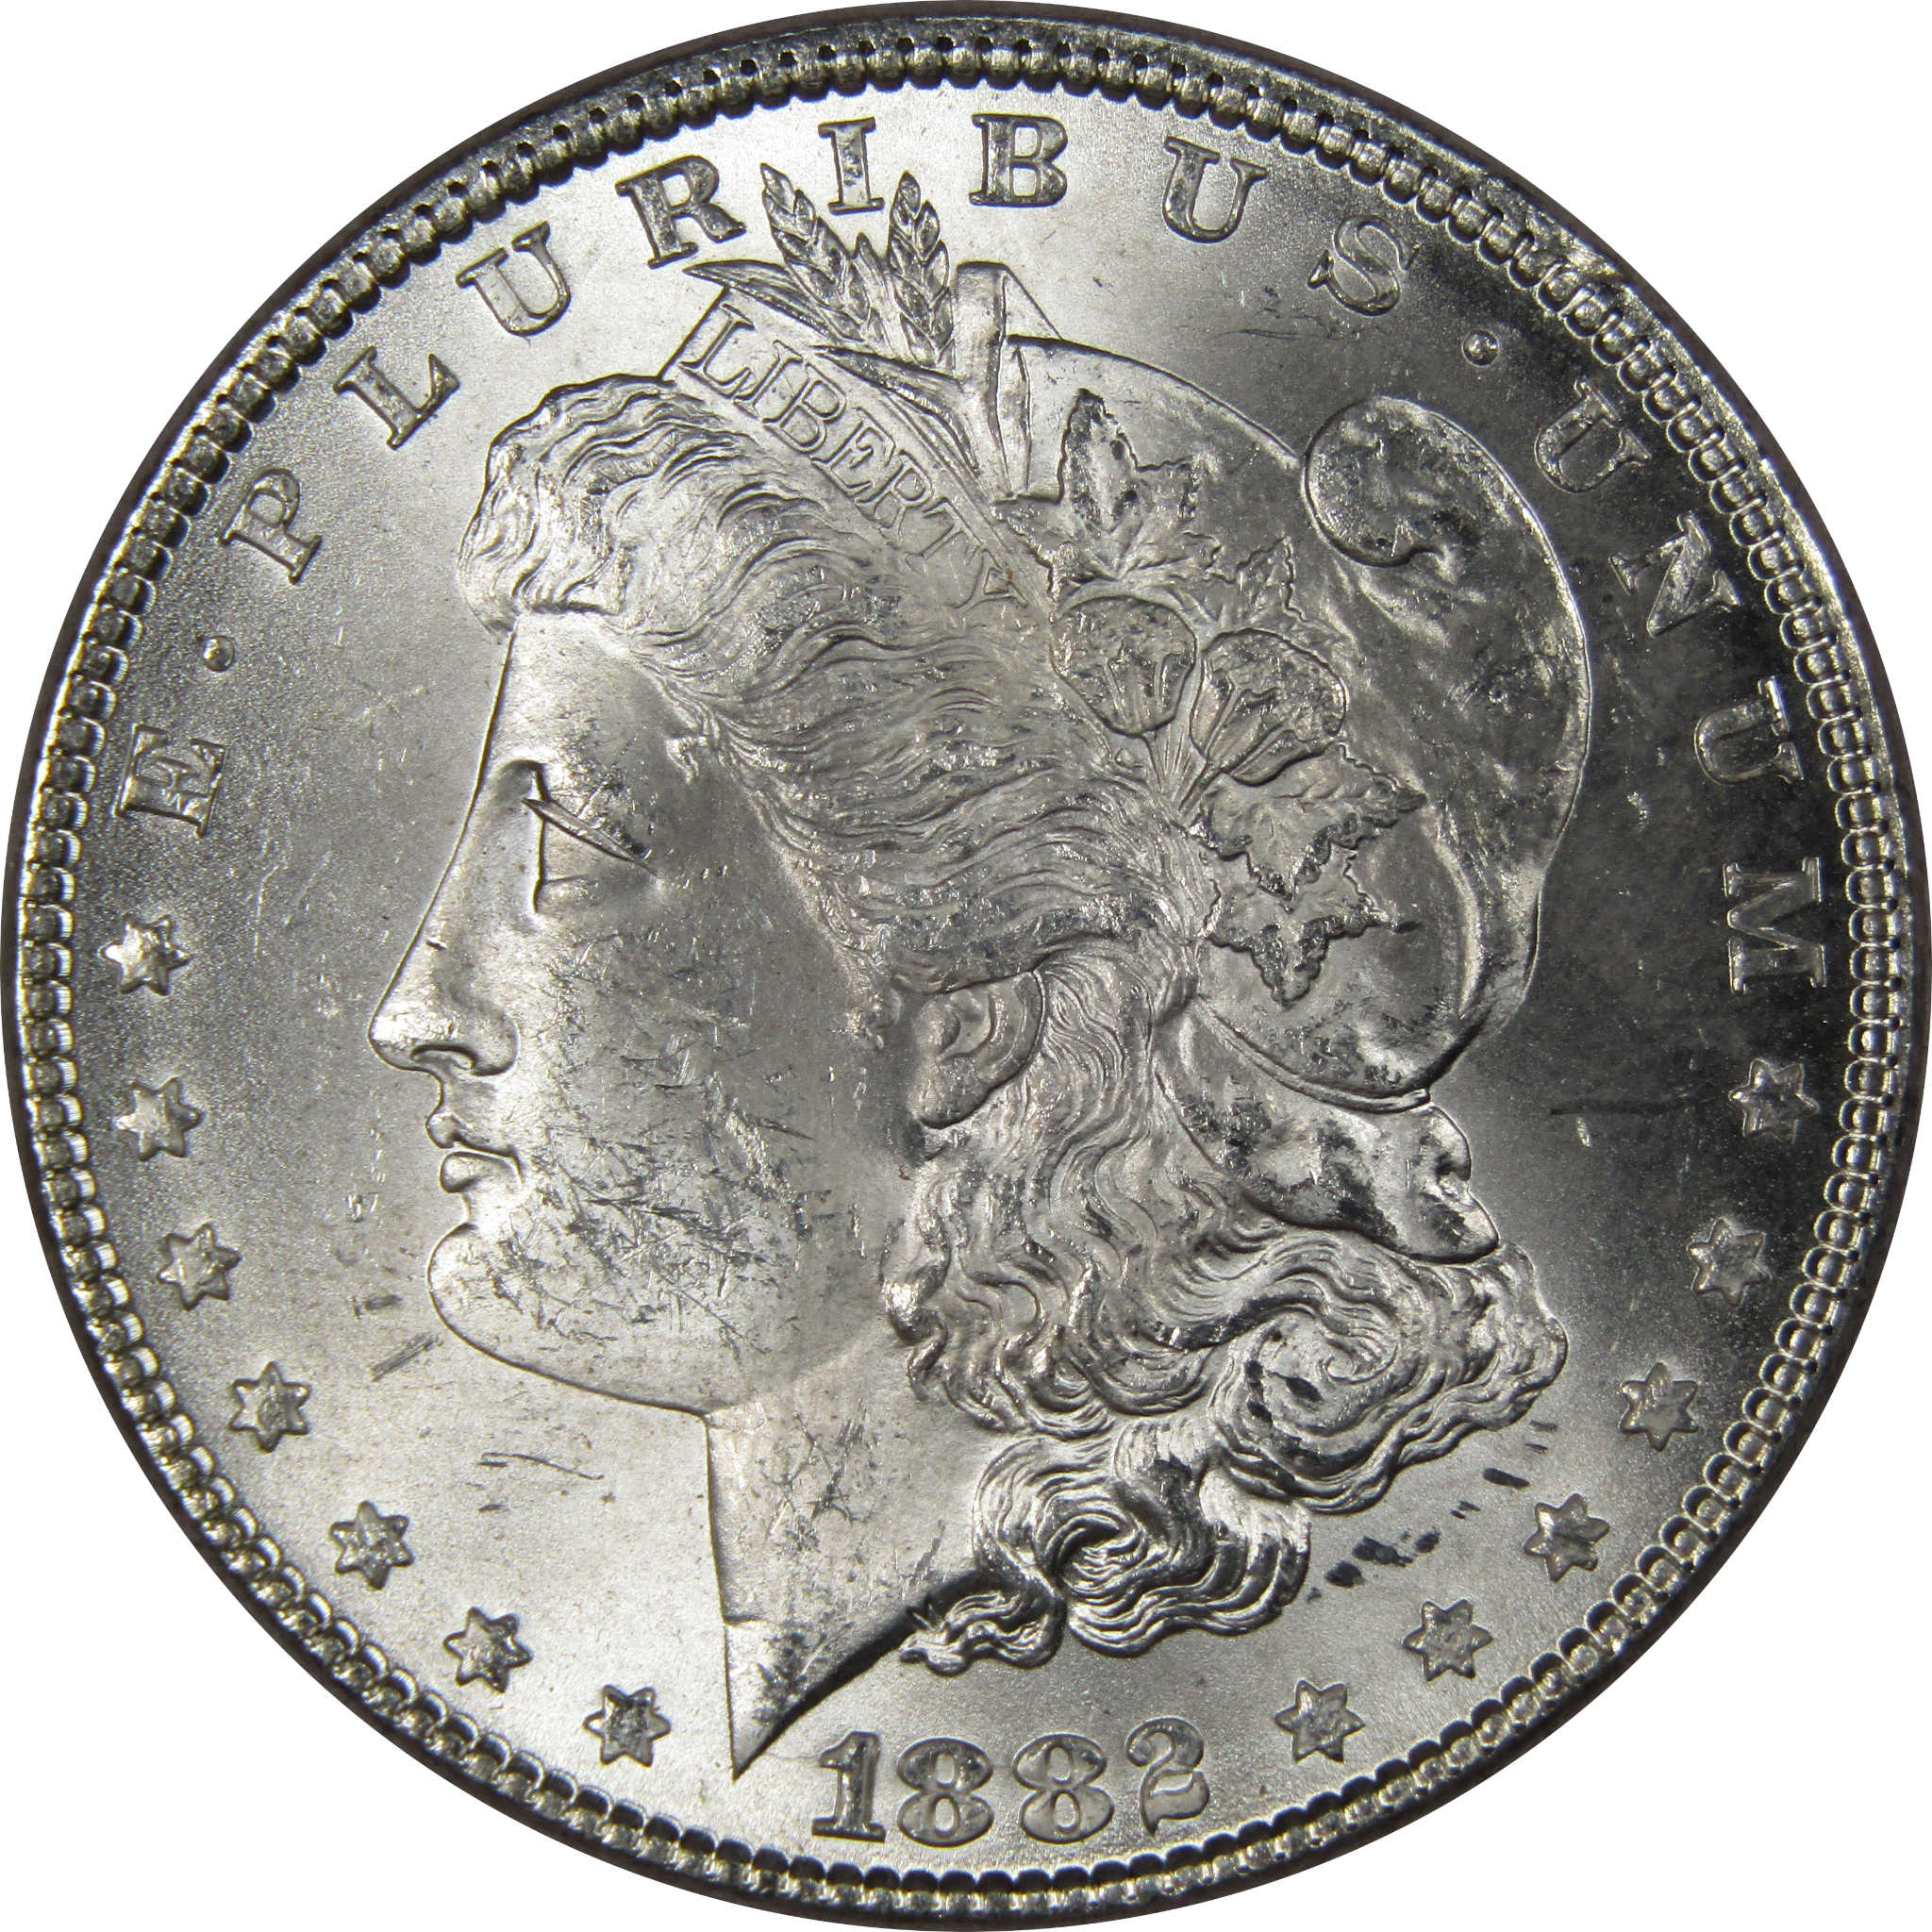 1882 Morgan Dollar BU Uncirculated Mint State 90% Silver SKU:IPC9710 - Morgan coin - Morgan silver dollar - Morgan silver dollar for sale - Profile Coins &amp; Collectibles